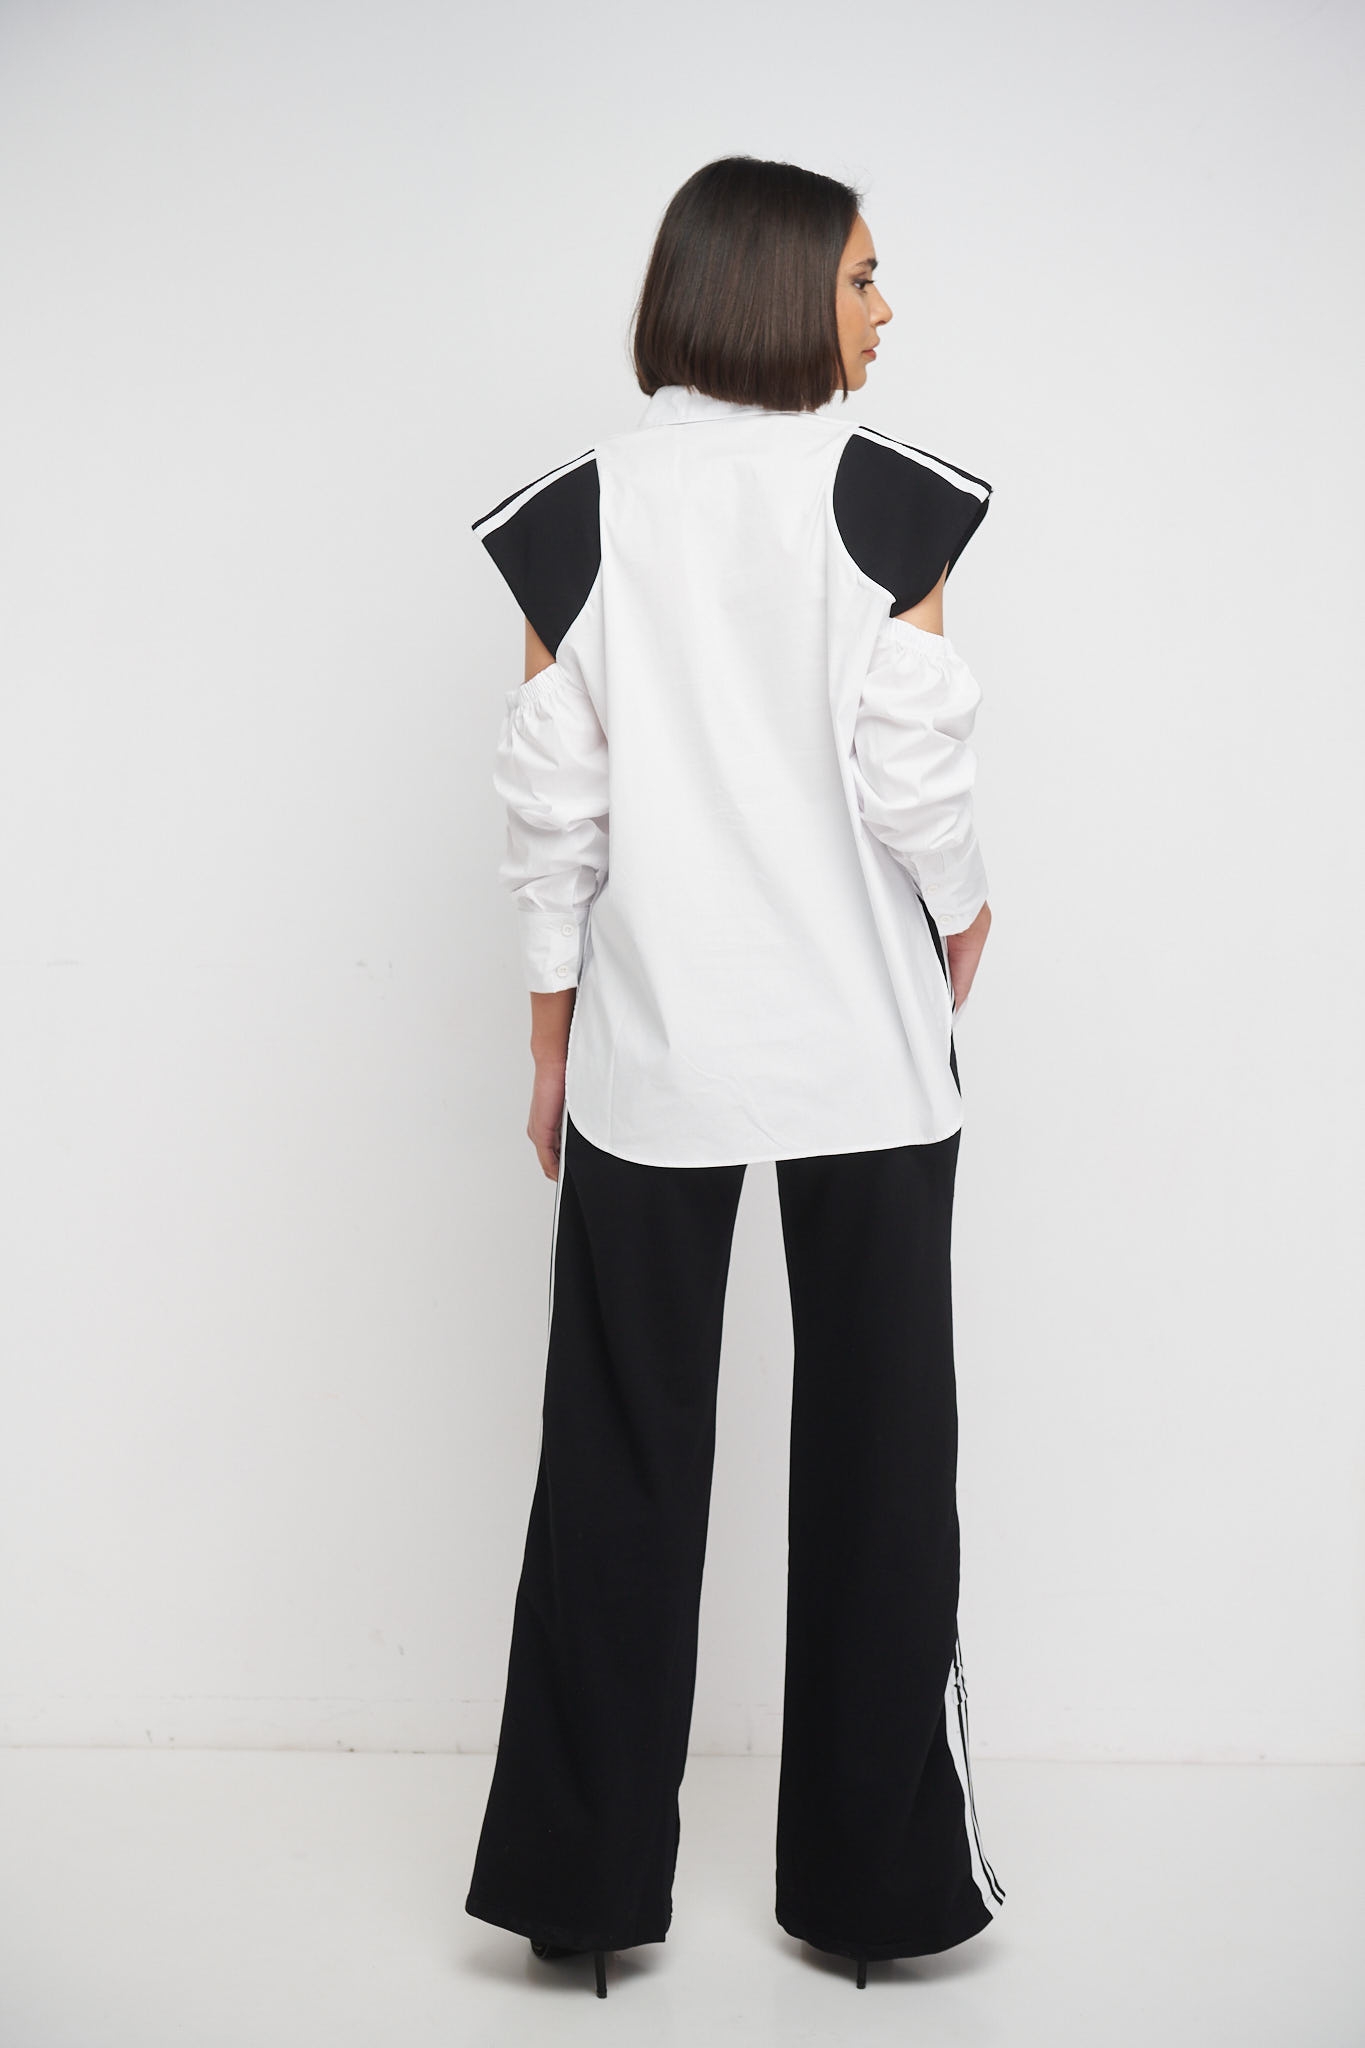 Tracksuit With Stripes And Elastic Band